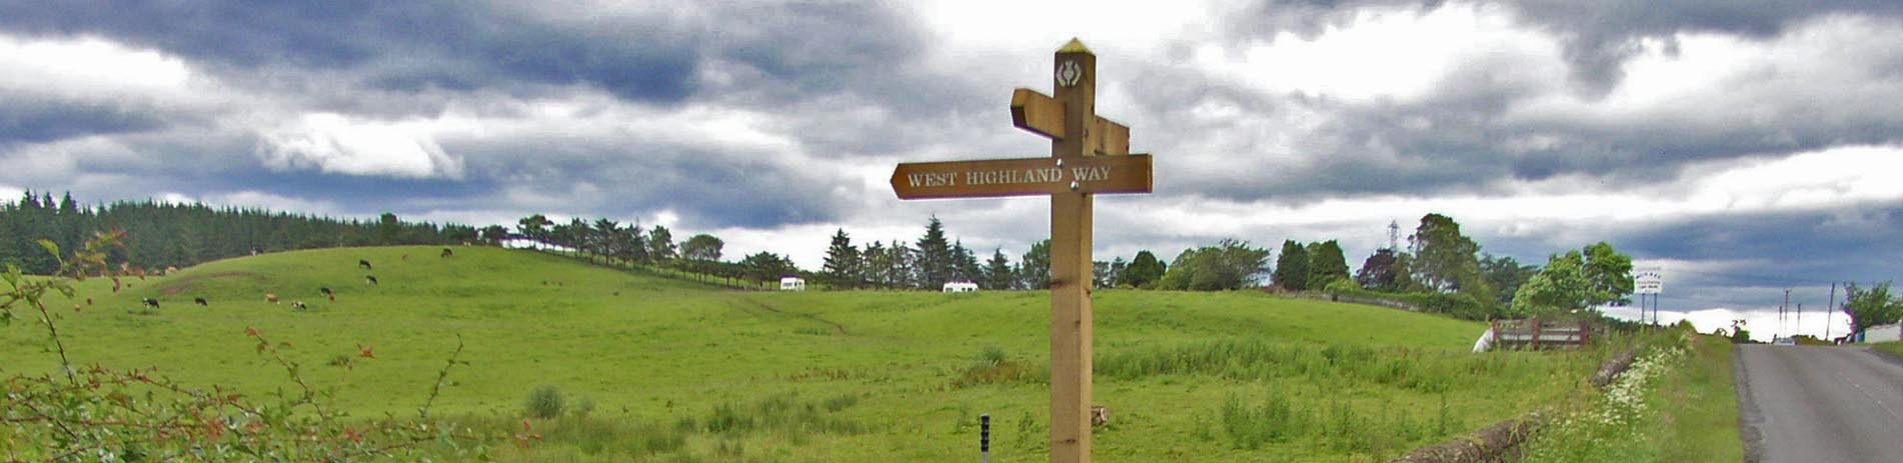 west-highland-way-wooden-marker-on-the-side-of-a-road-with-green-fields-on-the-left